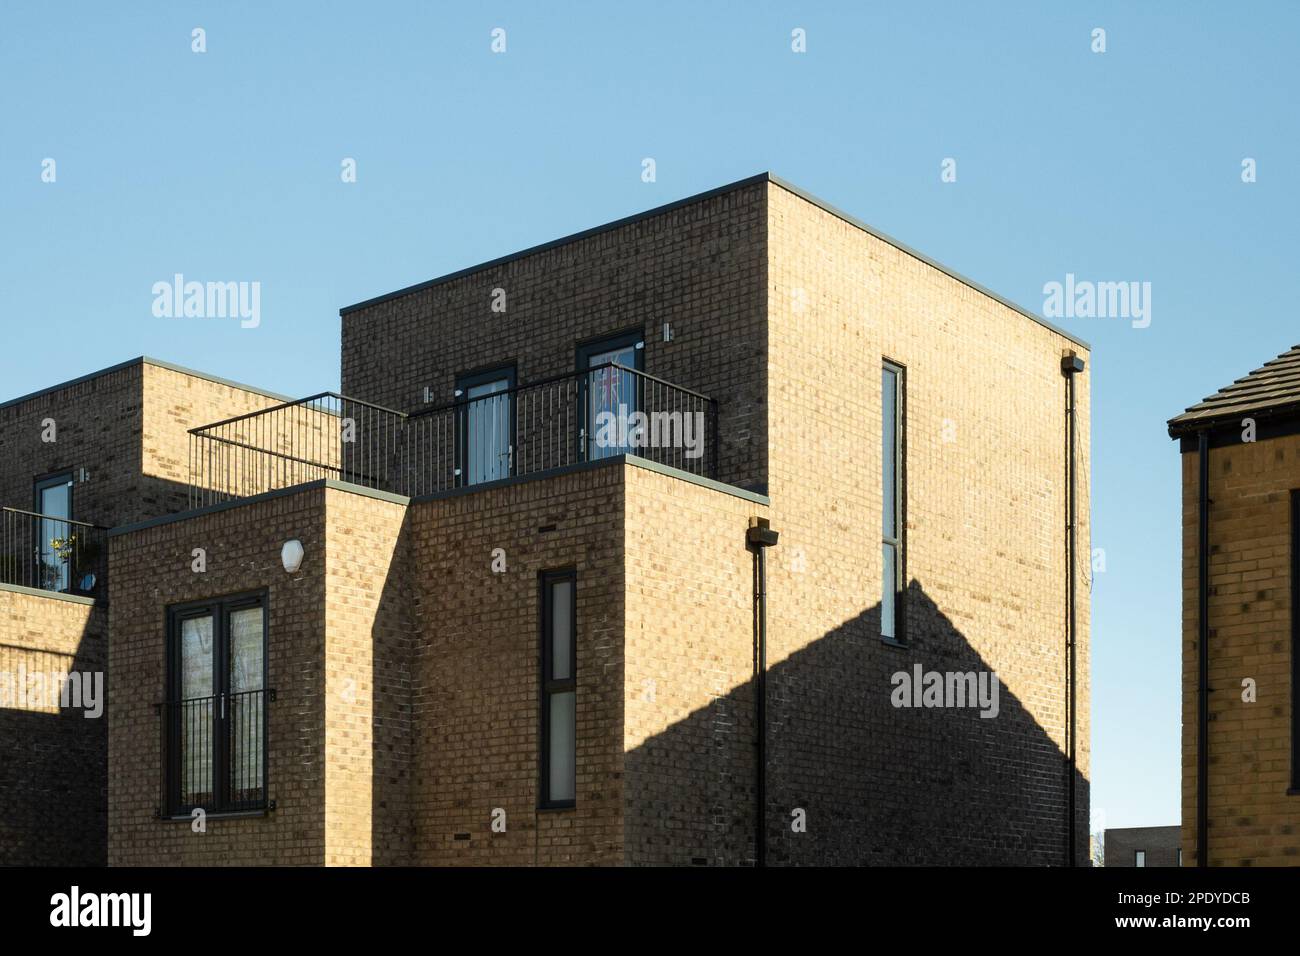 Brick building, residential apartments or flats, Salford, Manchester, England, UK. Clear blue sky, generic, copy space, minimalist, modern Stock Photo